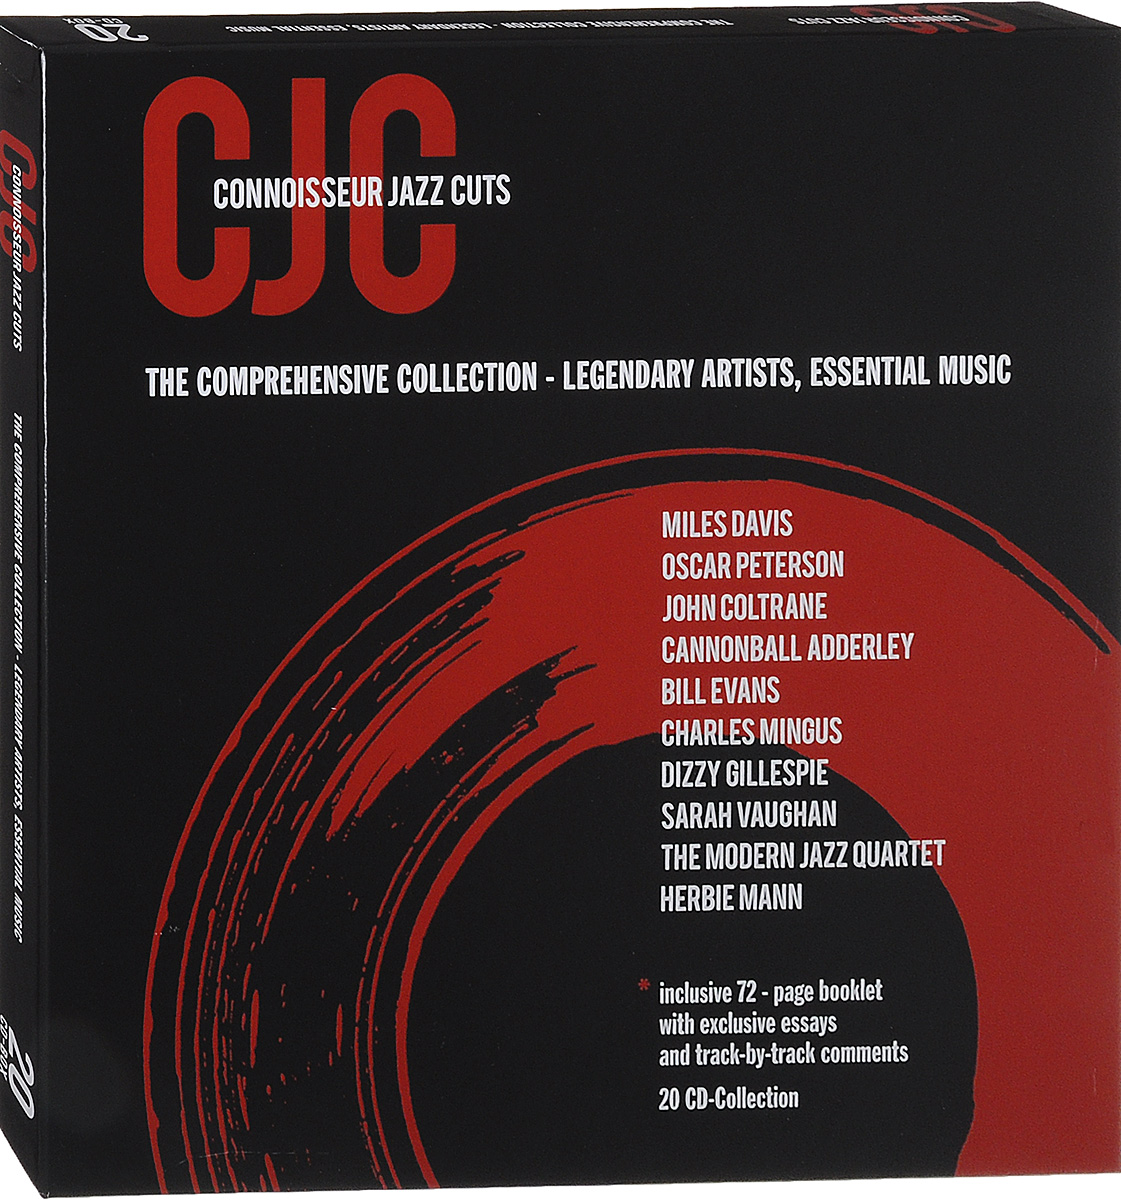 Connoisseur Jazz Cuts. The Comprehensive Collection - Legenadary Artists, Essential Music (20 CD)